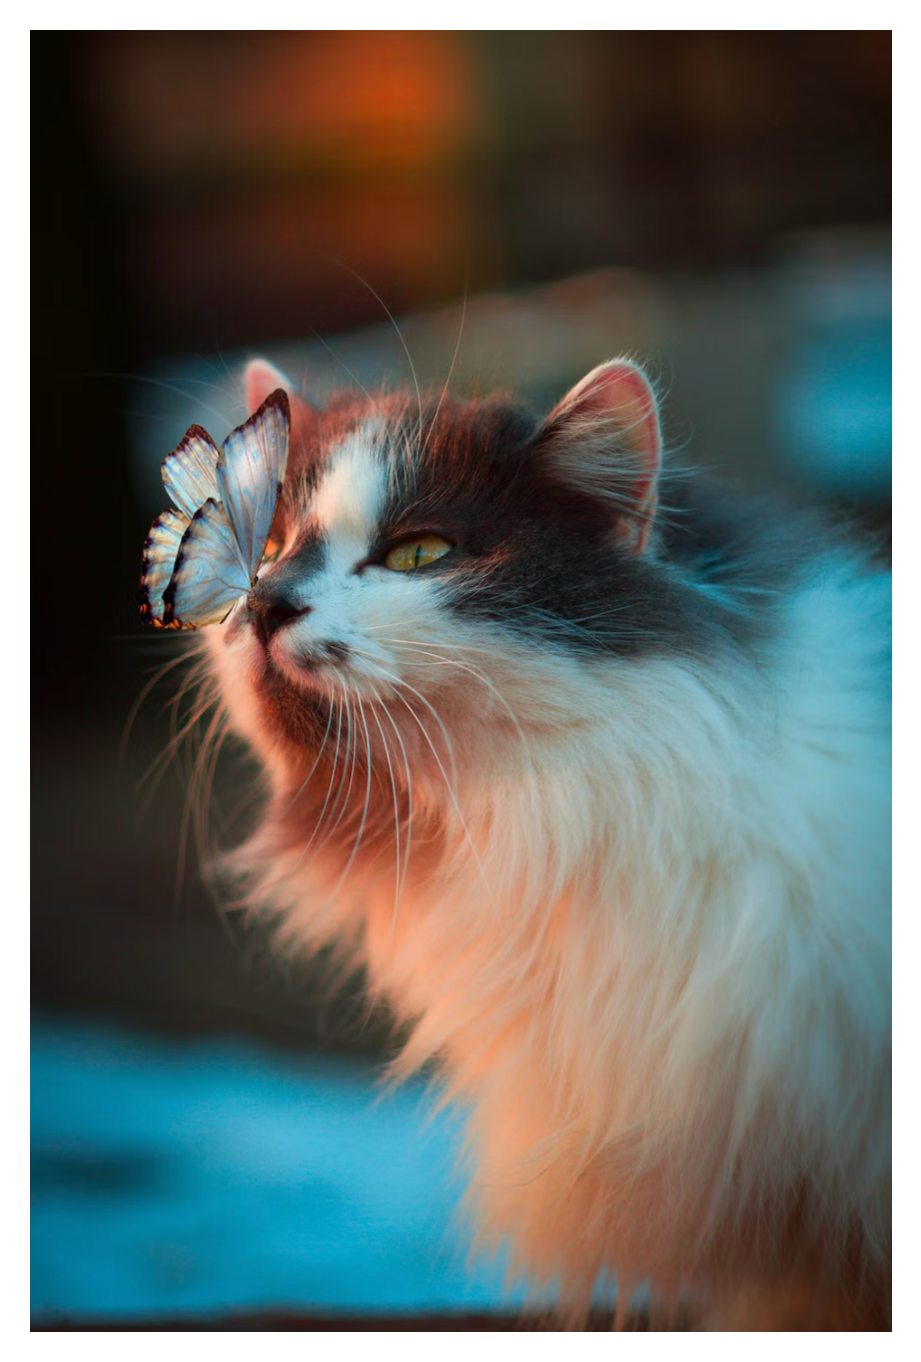 image of a butterfly landing on the nose of a cat